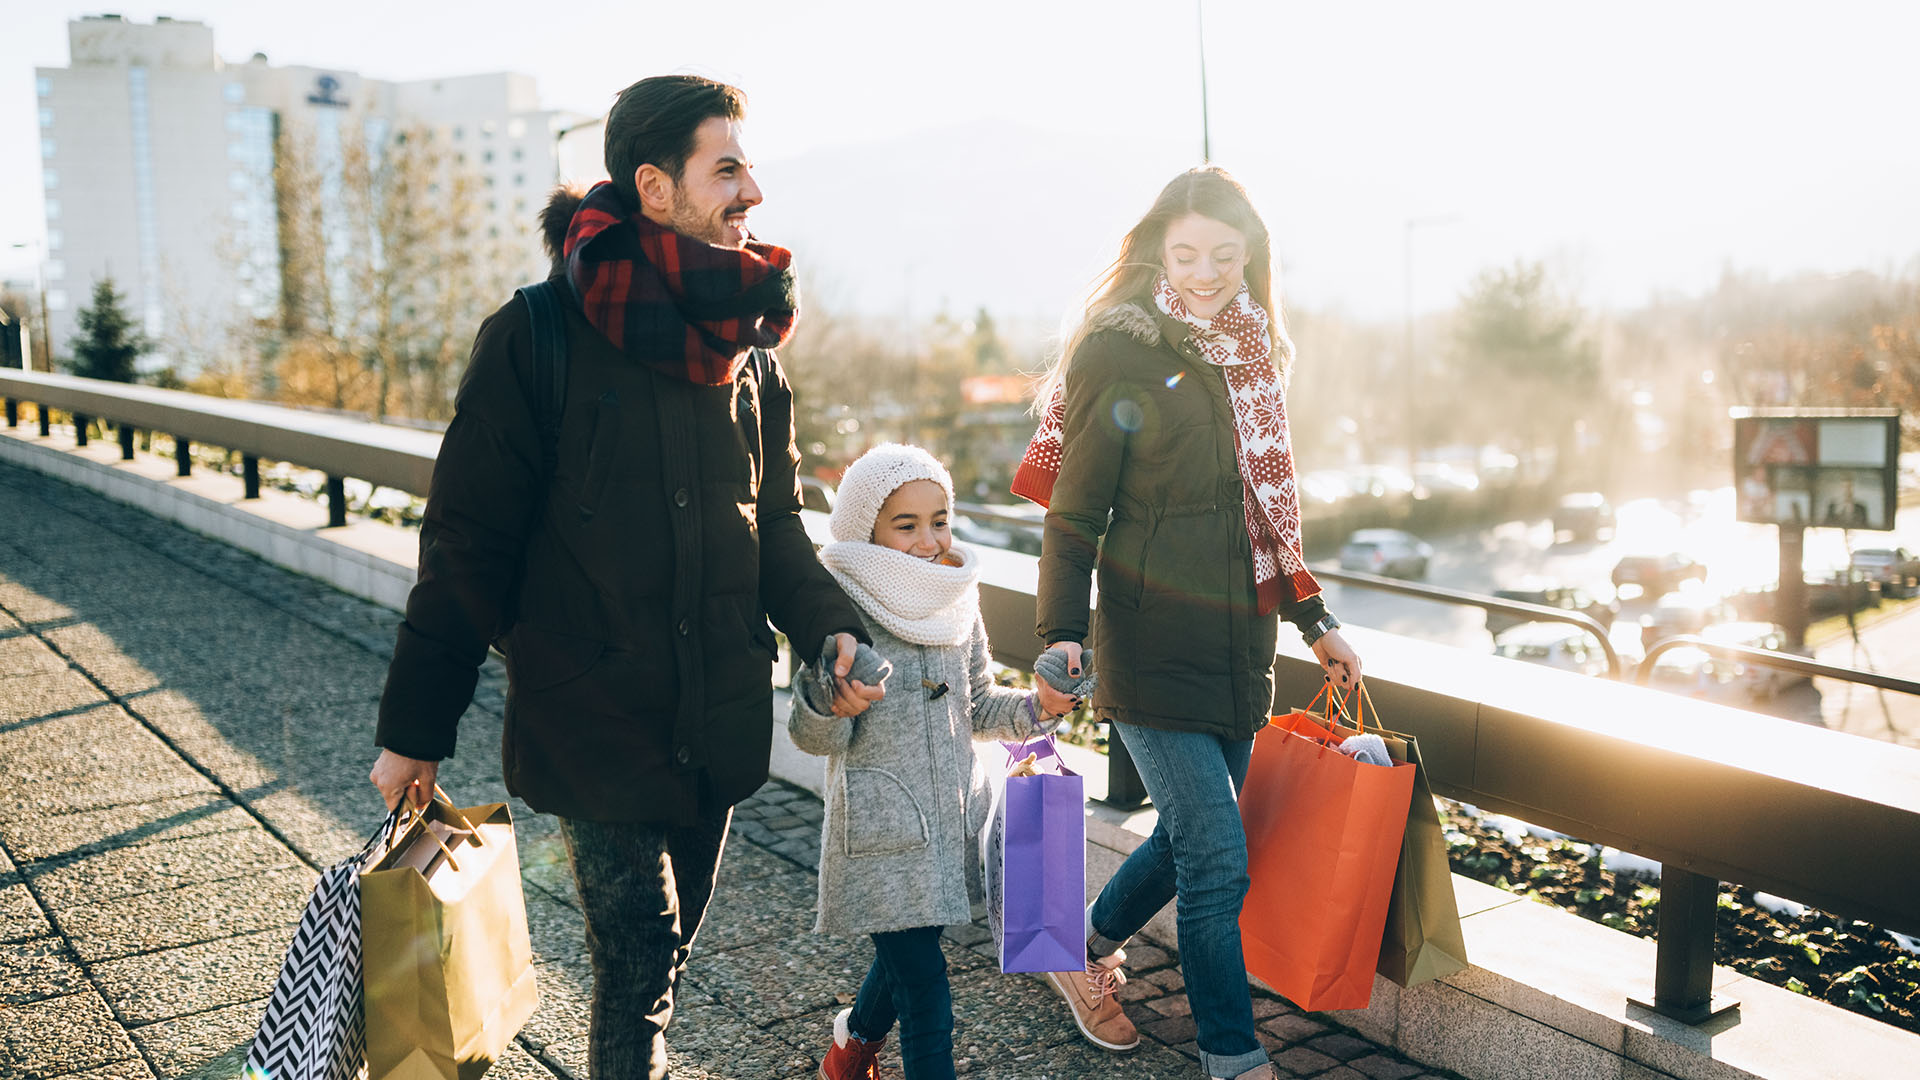 Two parents and a child hold hands in the winter, carrying shopping bags